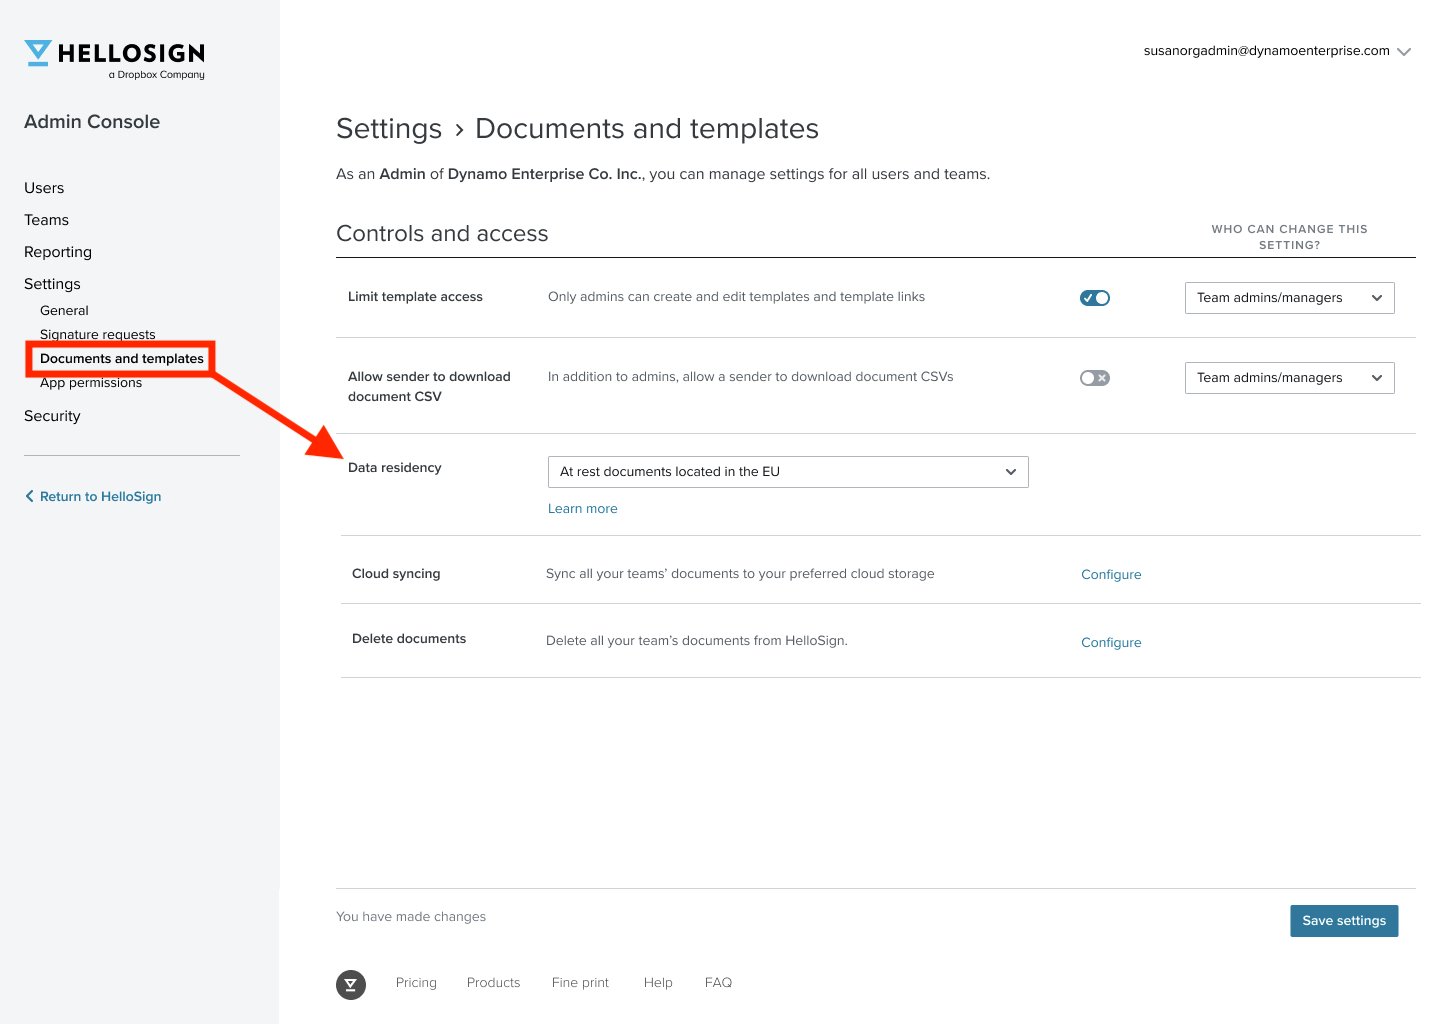 Update your data storage preference in the admin console